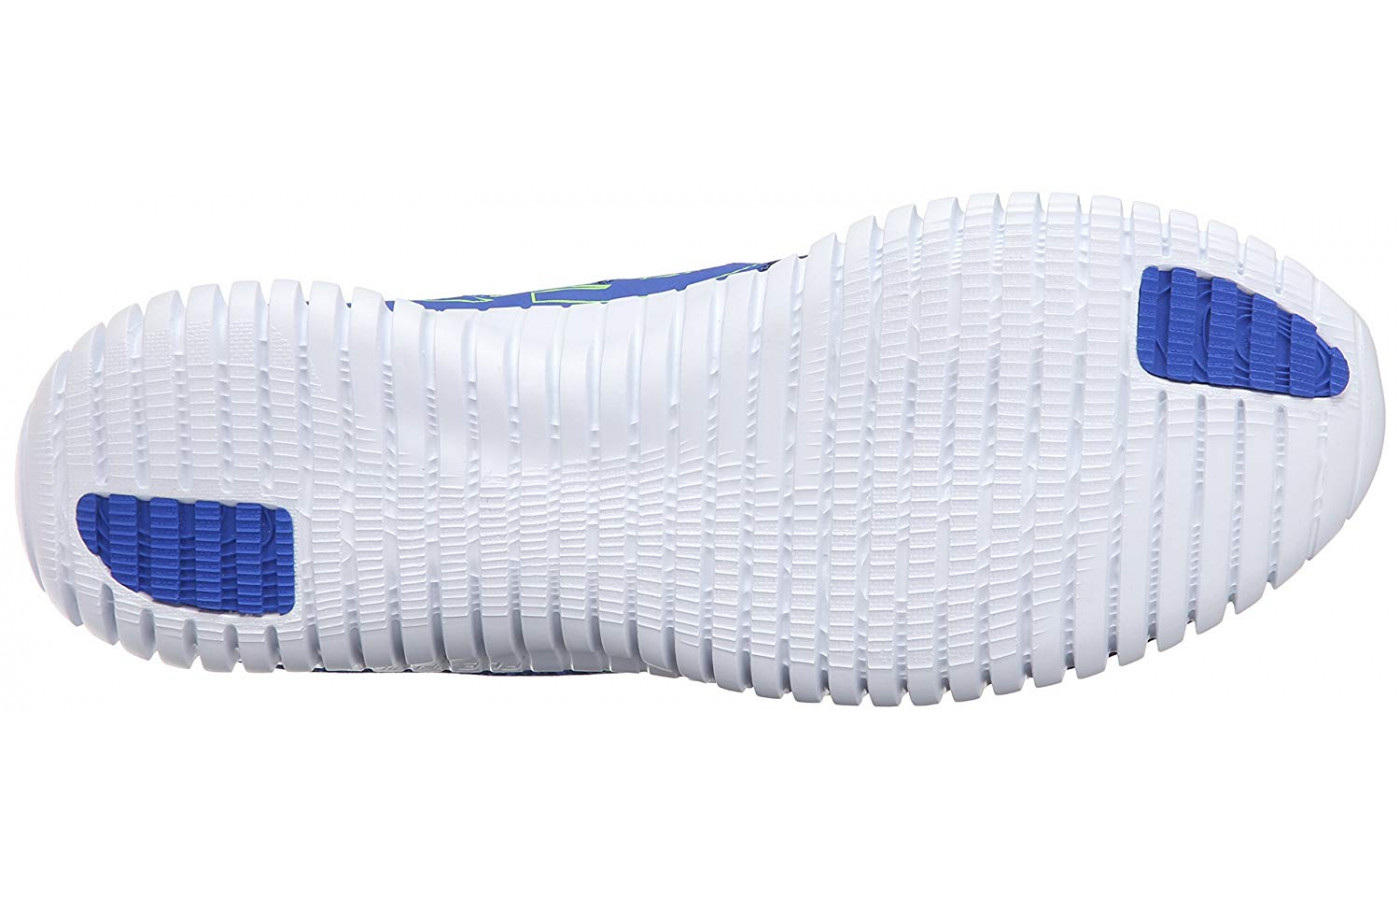 The outsole is lined with multiple flex grooves